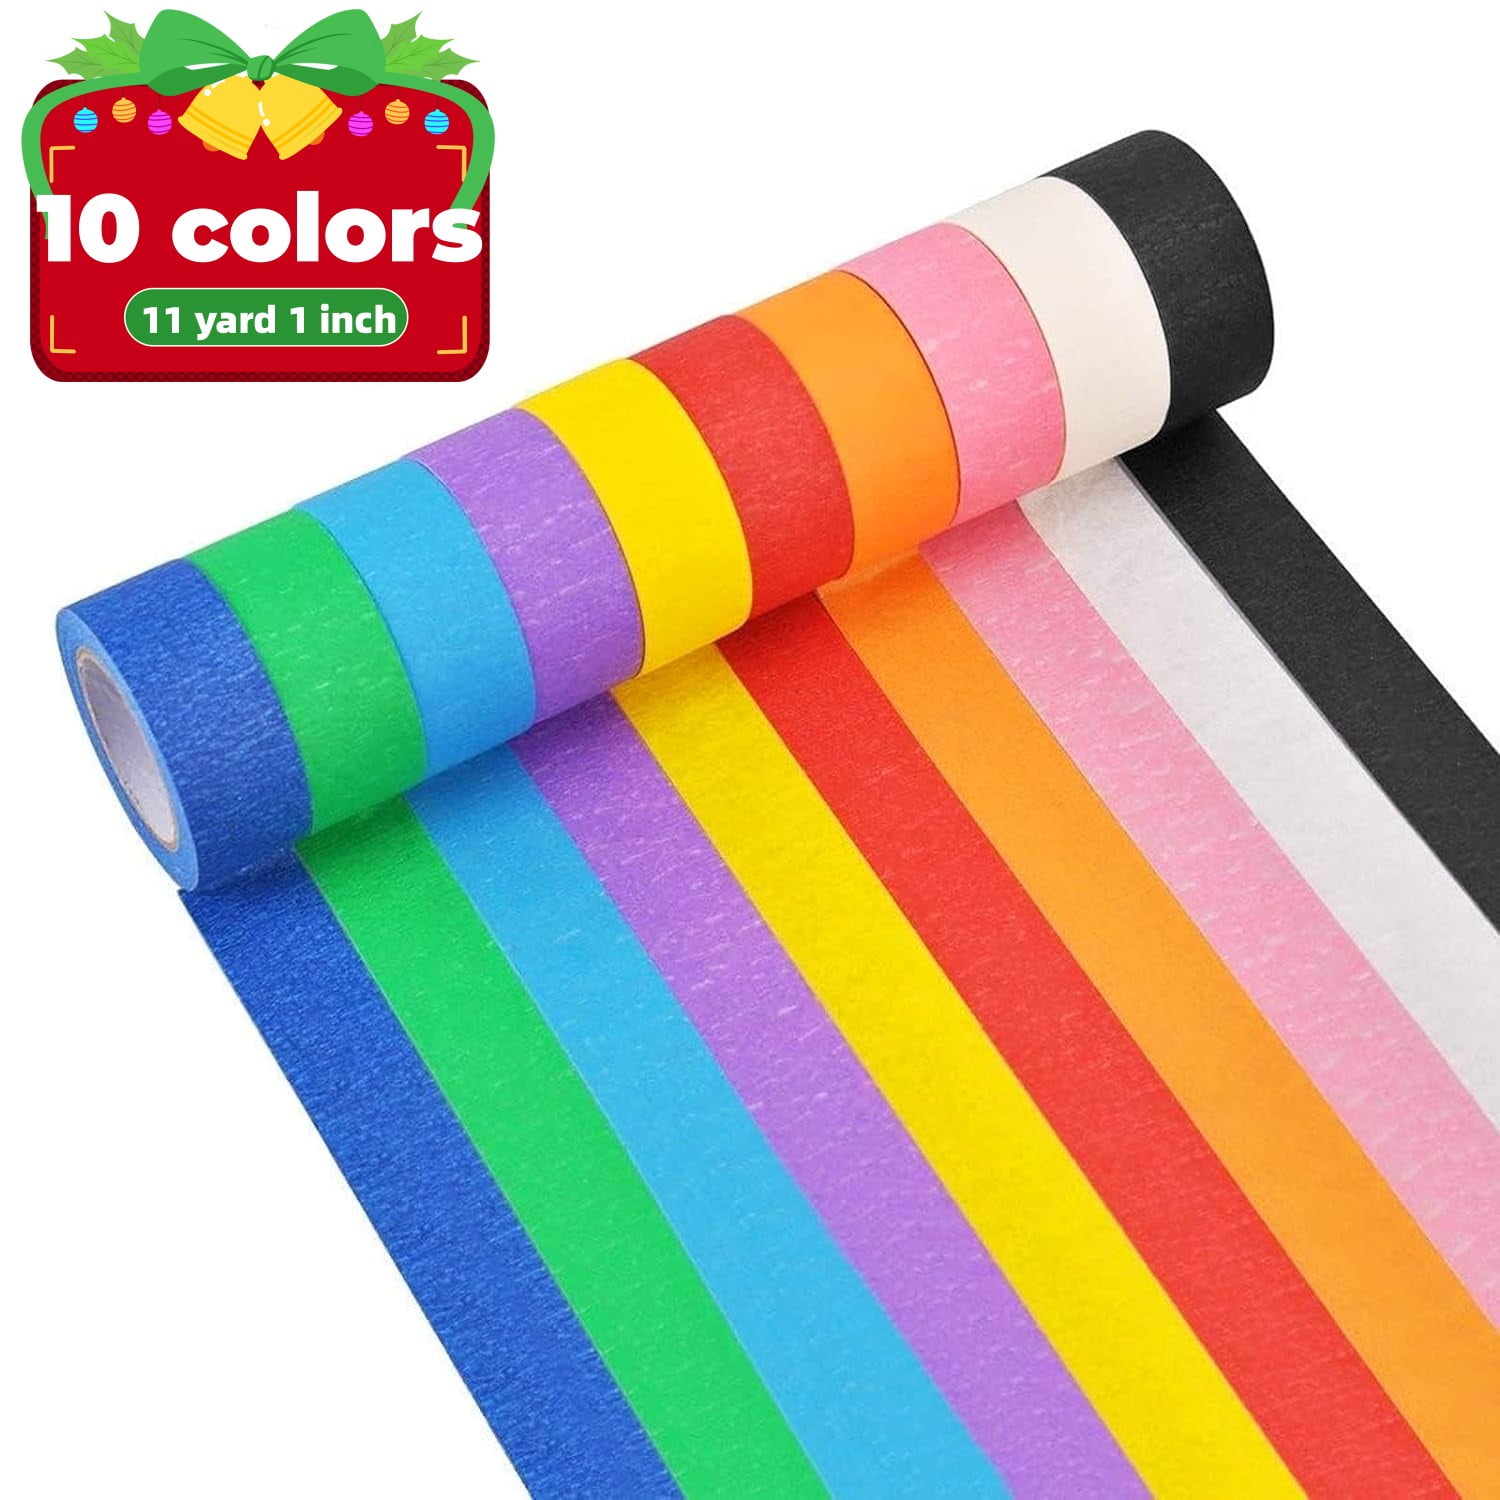 Colored Masking Tape 10 Rolls Craft Tape Color Painters Tape